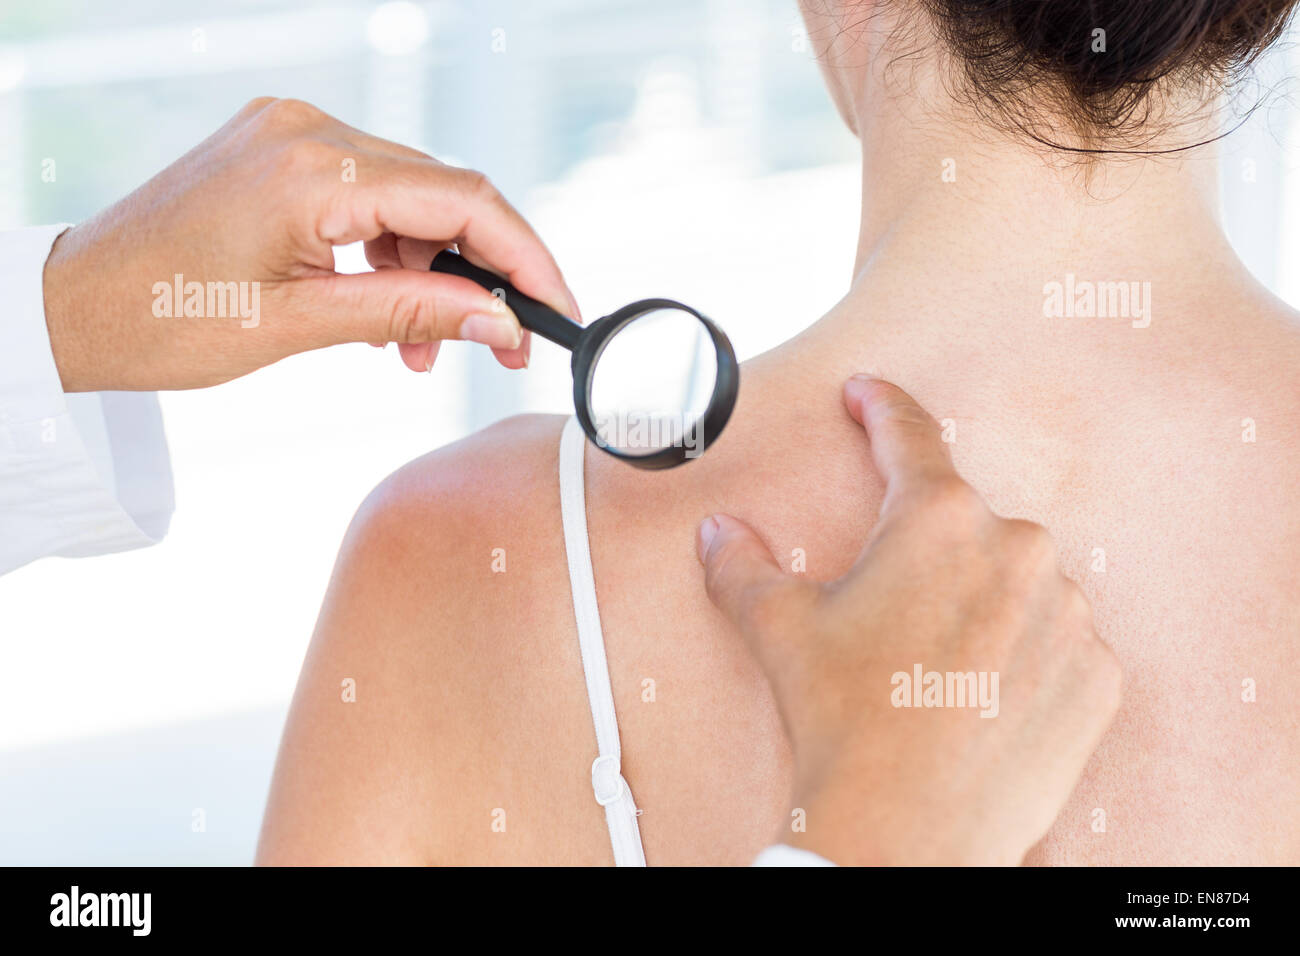 Doctor examining patient with magnifying glass Stock Photo